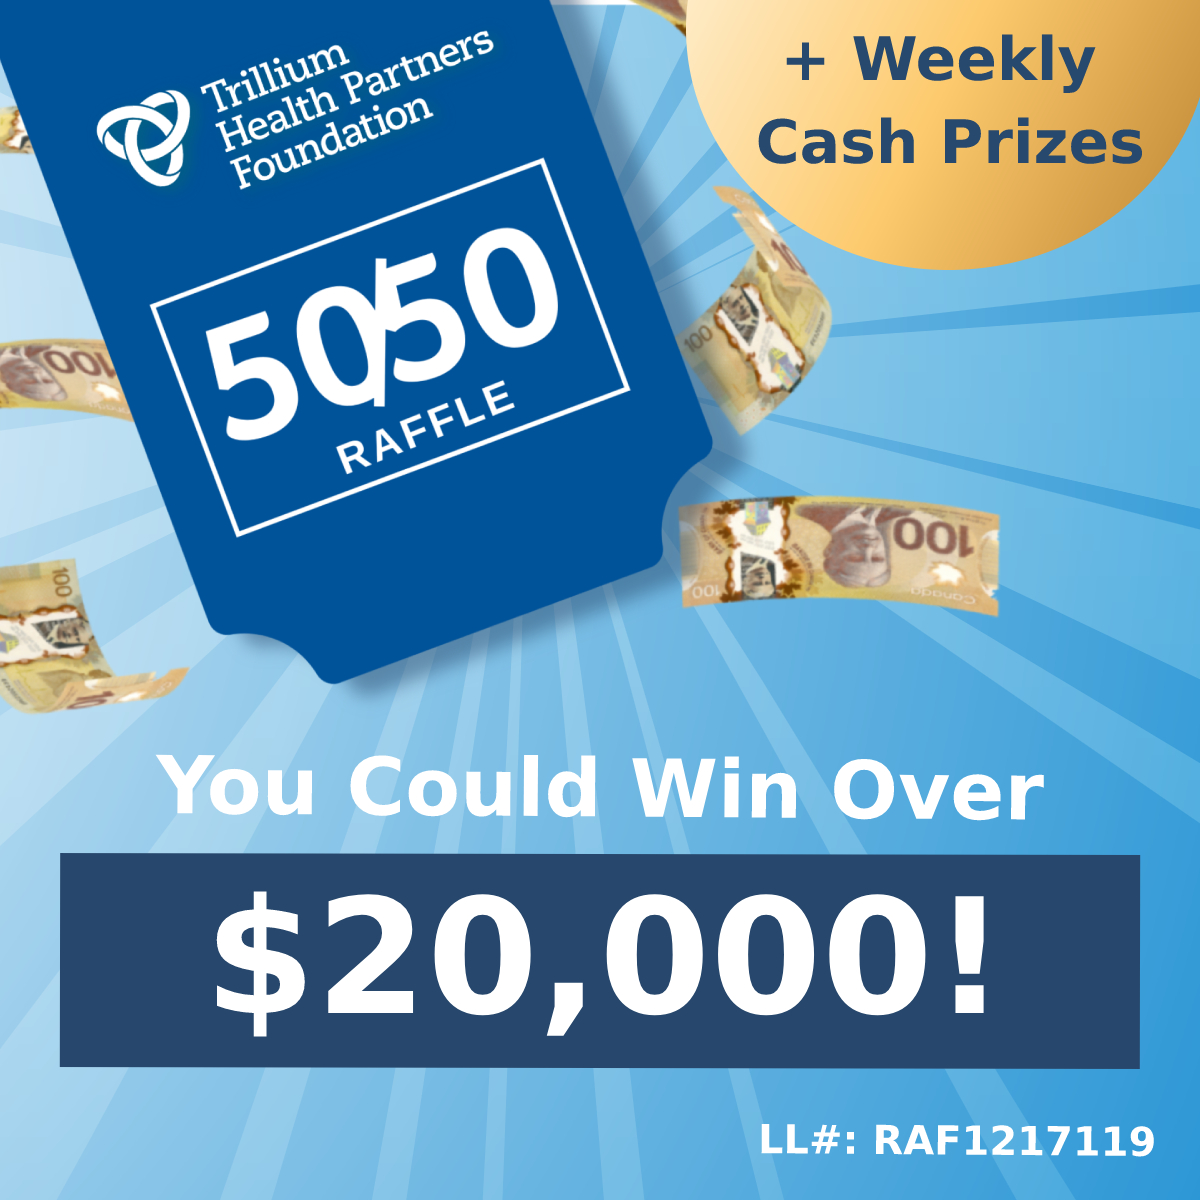 THPF 50/50 | Grand Prize is Over $20,000! | The Home Lottery News™